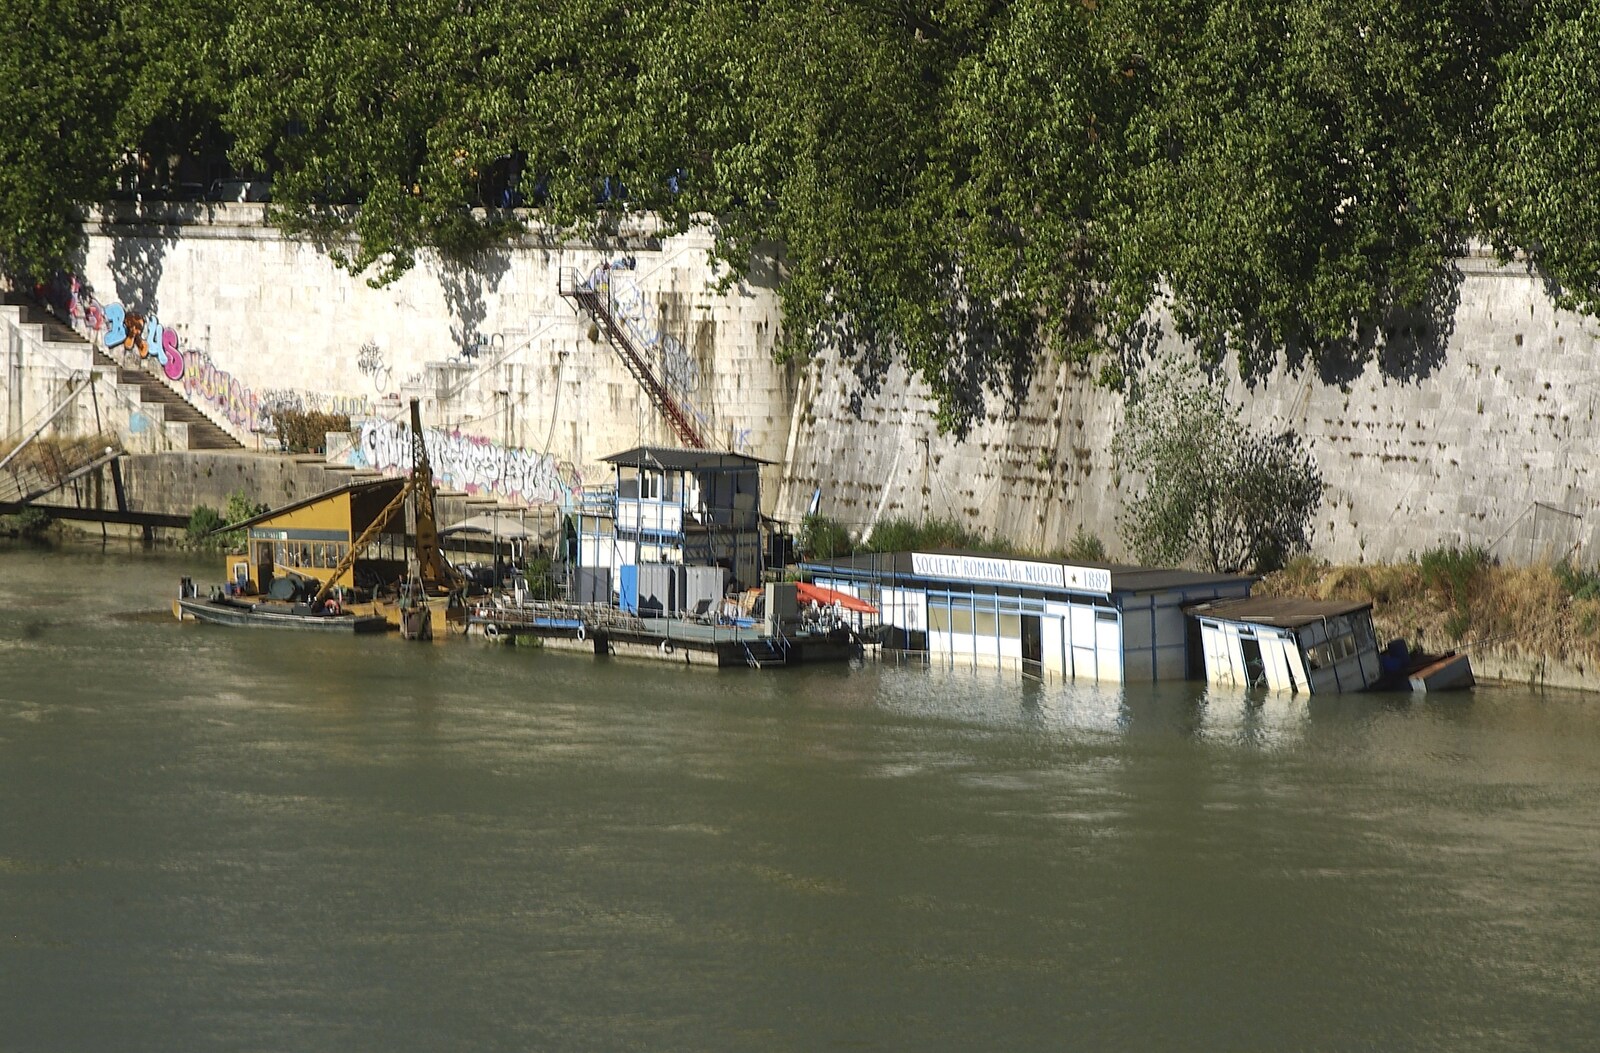 A sunken boat on the Tiber from A Sojourn in The Eternal City, Rome, Italy - 22nd July 2008